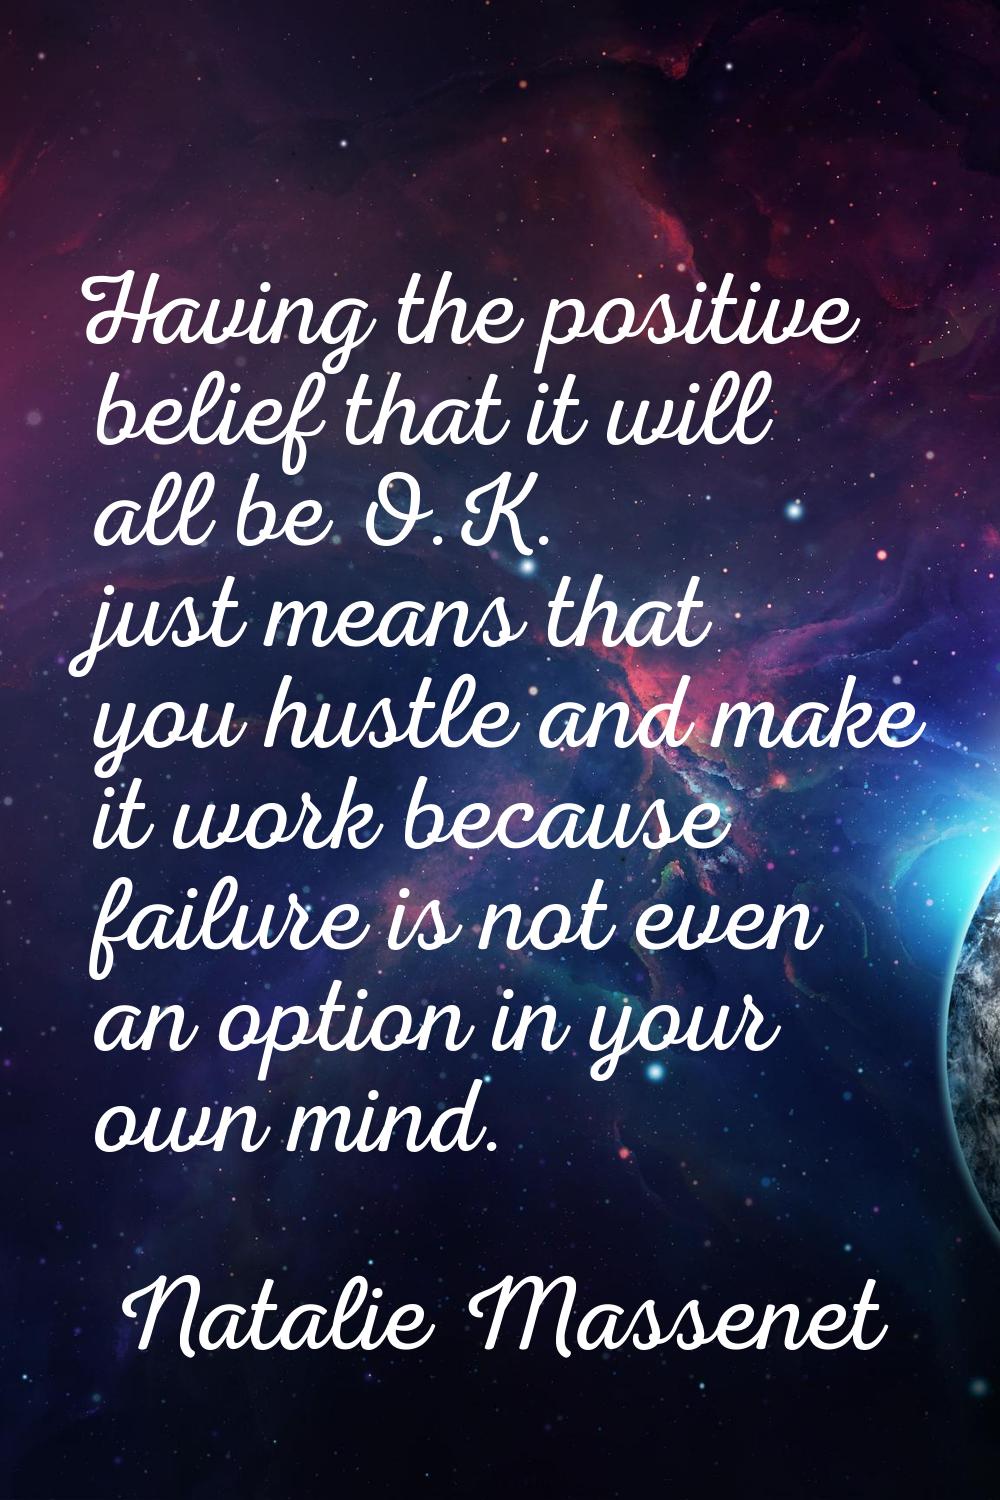 Having the positive belief that it will all be O.K. just means that you hustle and make it work bec